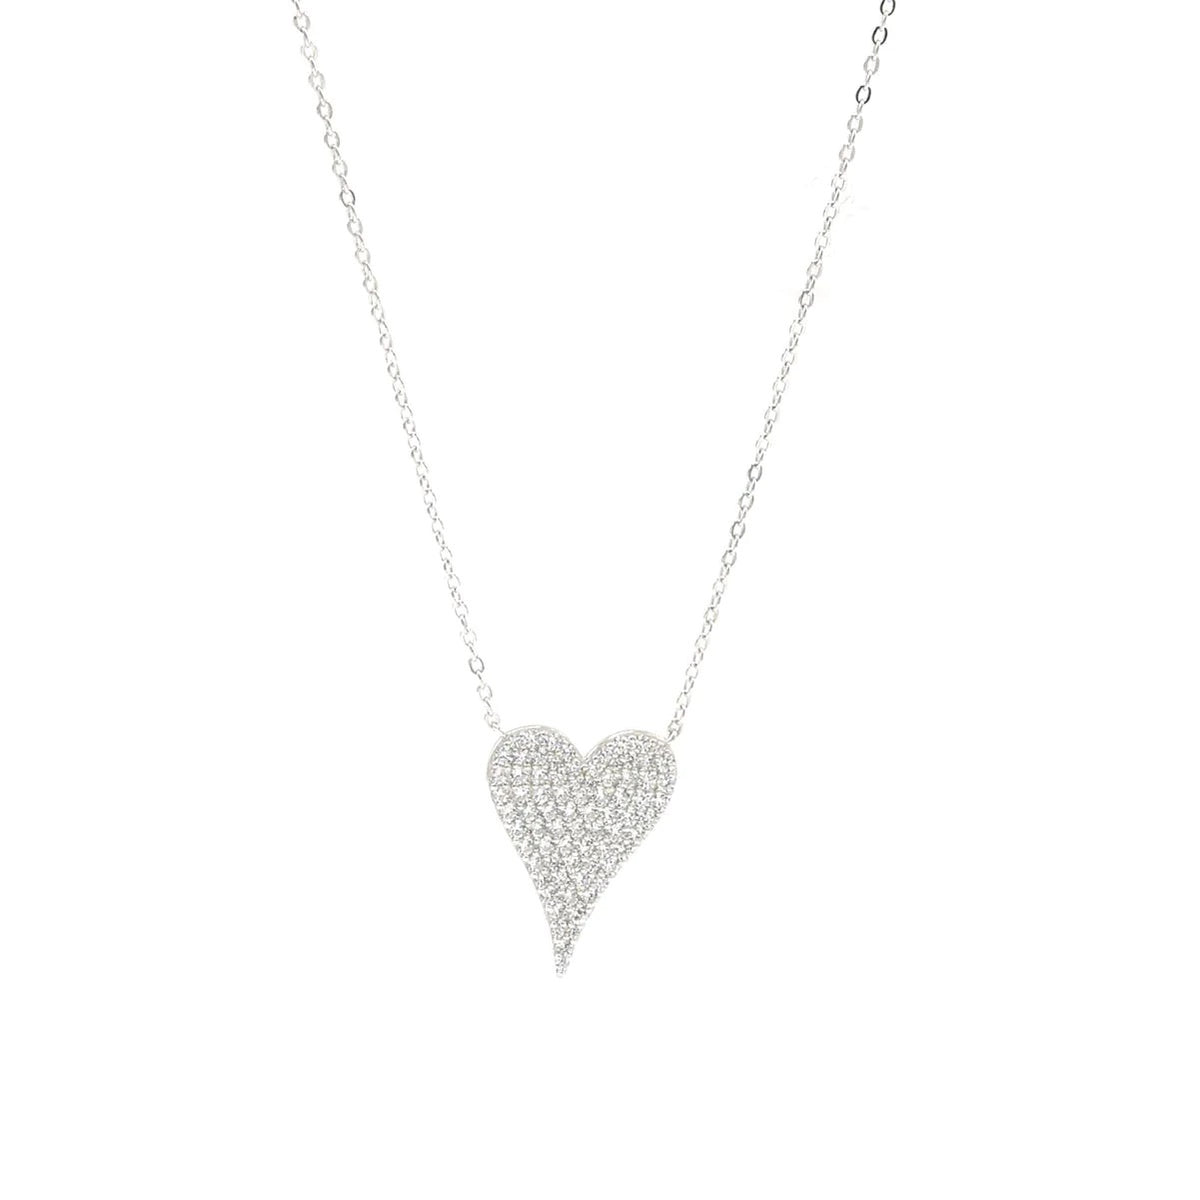 Large Heart Necklace, .925 Sterling Silver Pave Cubic Zirconia Hypoallergenic Heart Necklace